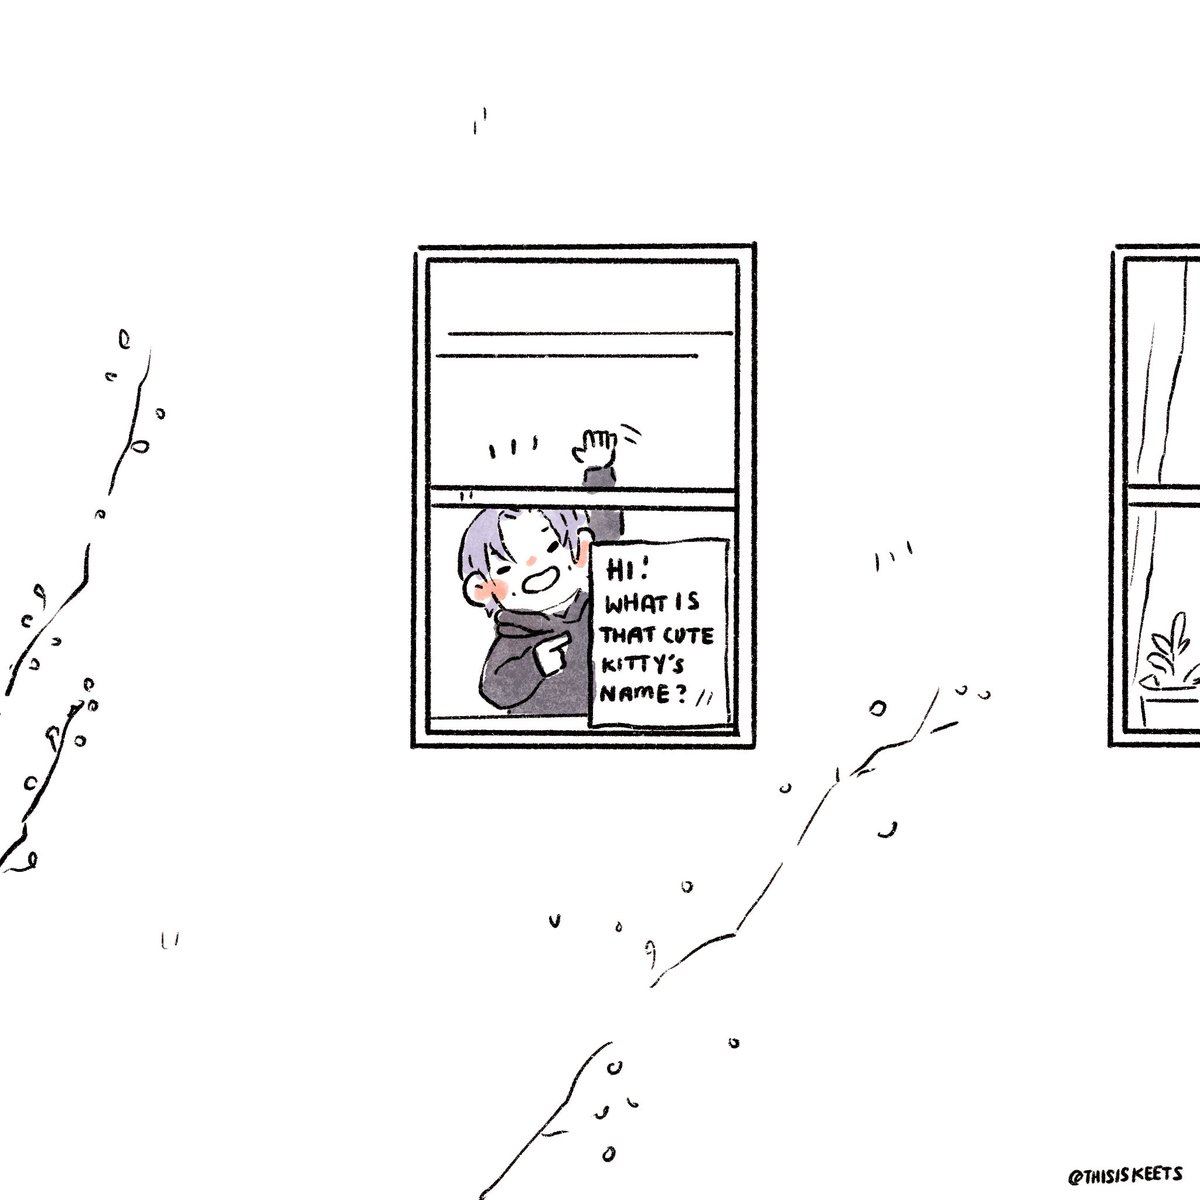 Yoonmin live in the opposite building from Namjin. They’ve never really interacted but ever since the lockdown, everyone has had more time to notice the things around them.On Day 3, Joon realises there’s a cute kitty by his neighbour’s window. #yoonmin  #namjin